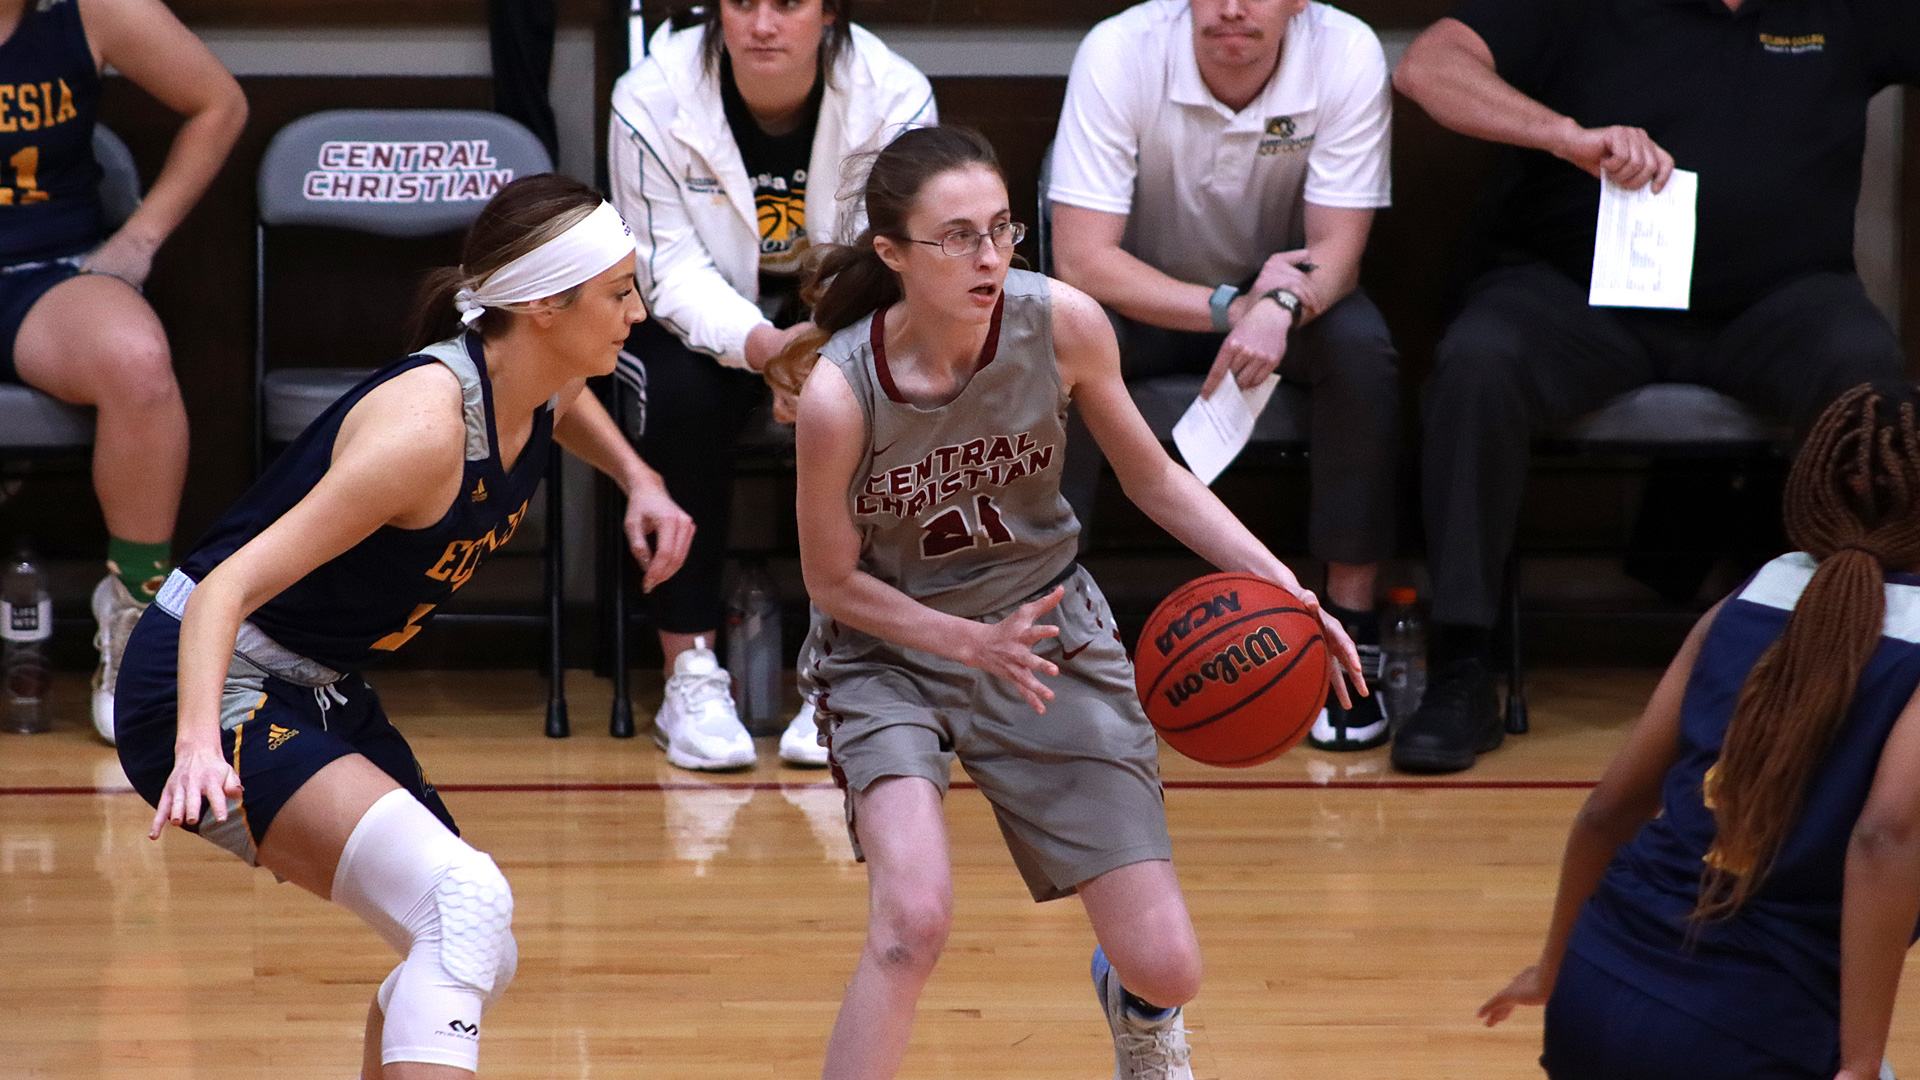 CCCB junior Katelynn Wampler scored eight points and grabbed four rebounds during the Saints' 52-42 win over Great Lakes Christian College on Monday night.